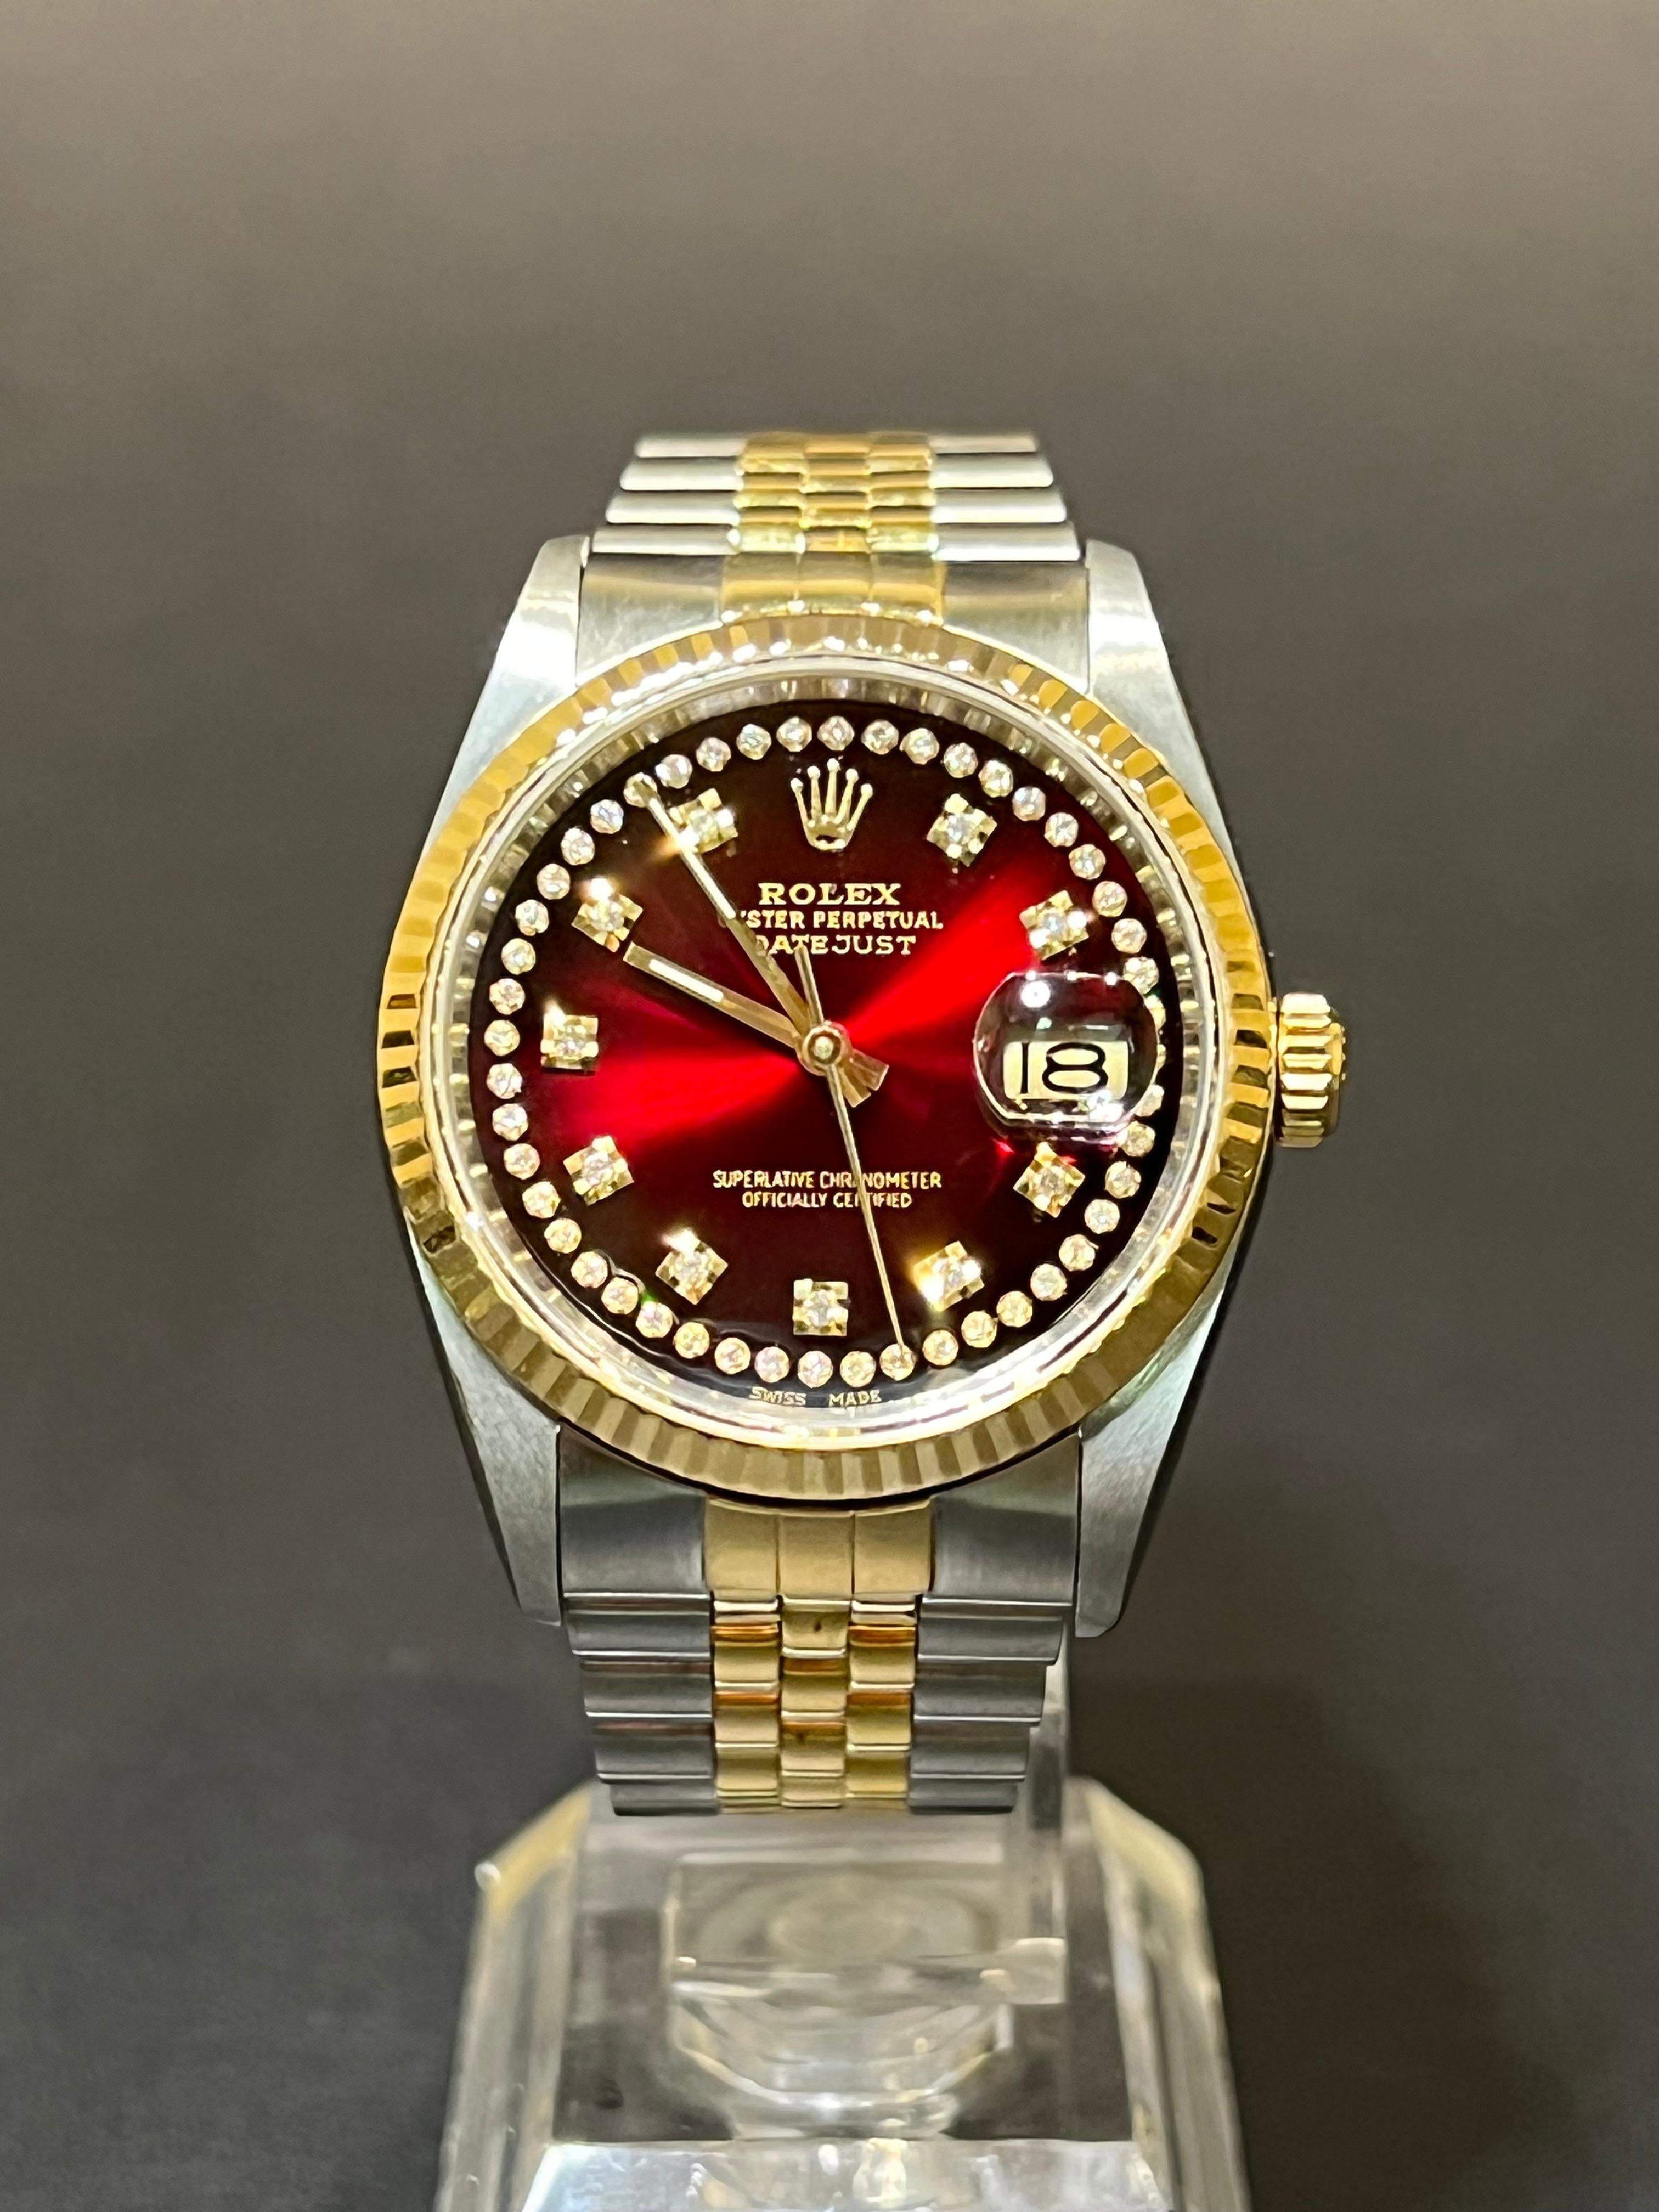 Oyster perpetual datejust 36 in oysterseel and yellow gold features a golden, fluted-motif dial and jubilee bracelet with a custom red vignette face.

DETAILS

Length: 8